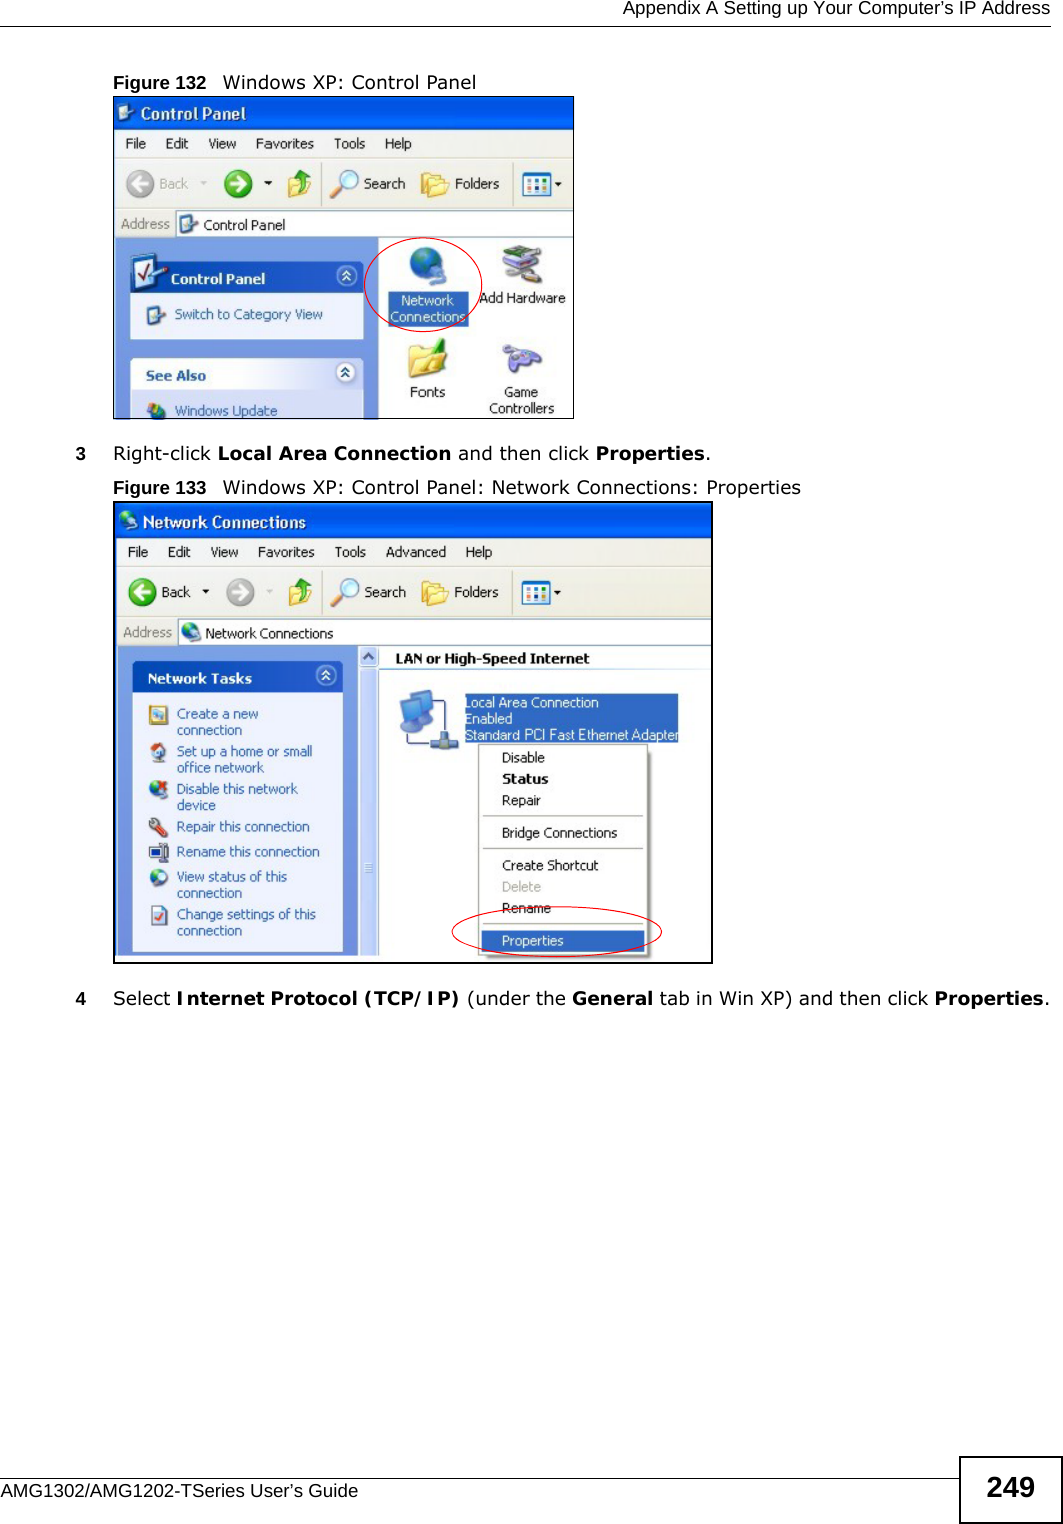  Appendix A Setting up Your Computer’s IP AddressAMG1302/AMG1202-TSeries User’s Guide 249Figure 132   Windows XP: Control Panel3Right-click Local Area Connection and then click Properties.Figure 133   Windows XP: Control Panel: Network Connections: Properties4Select Internet Protocol (TCP/IP) (under the General tab in Win XP) and then click Properties.